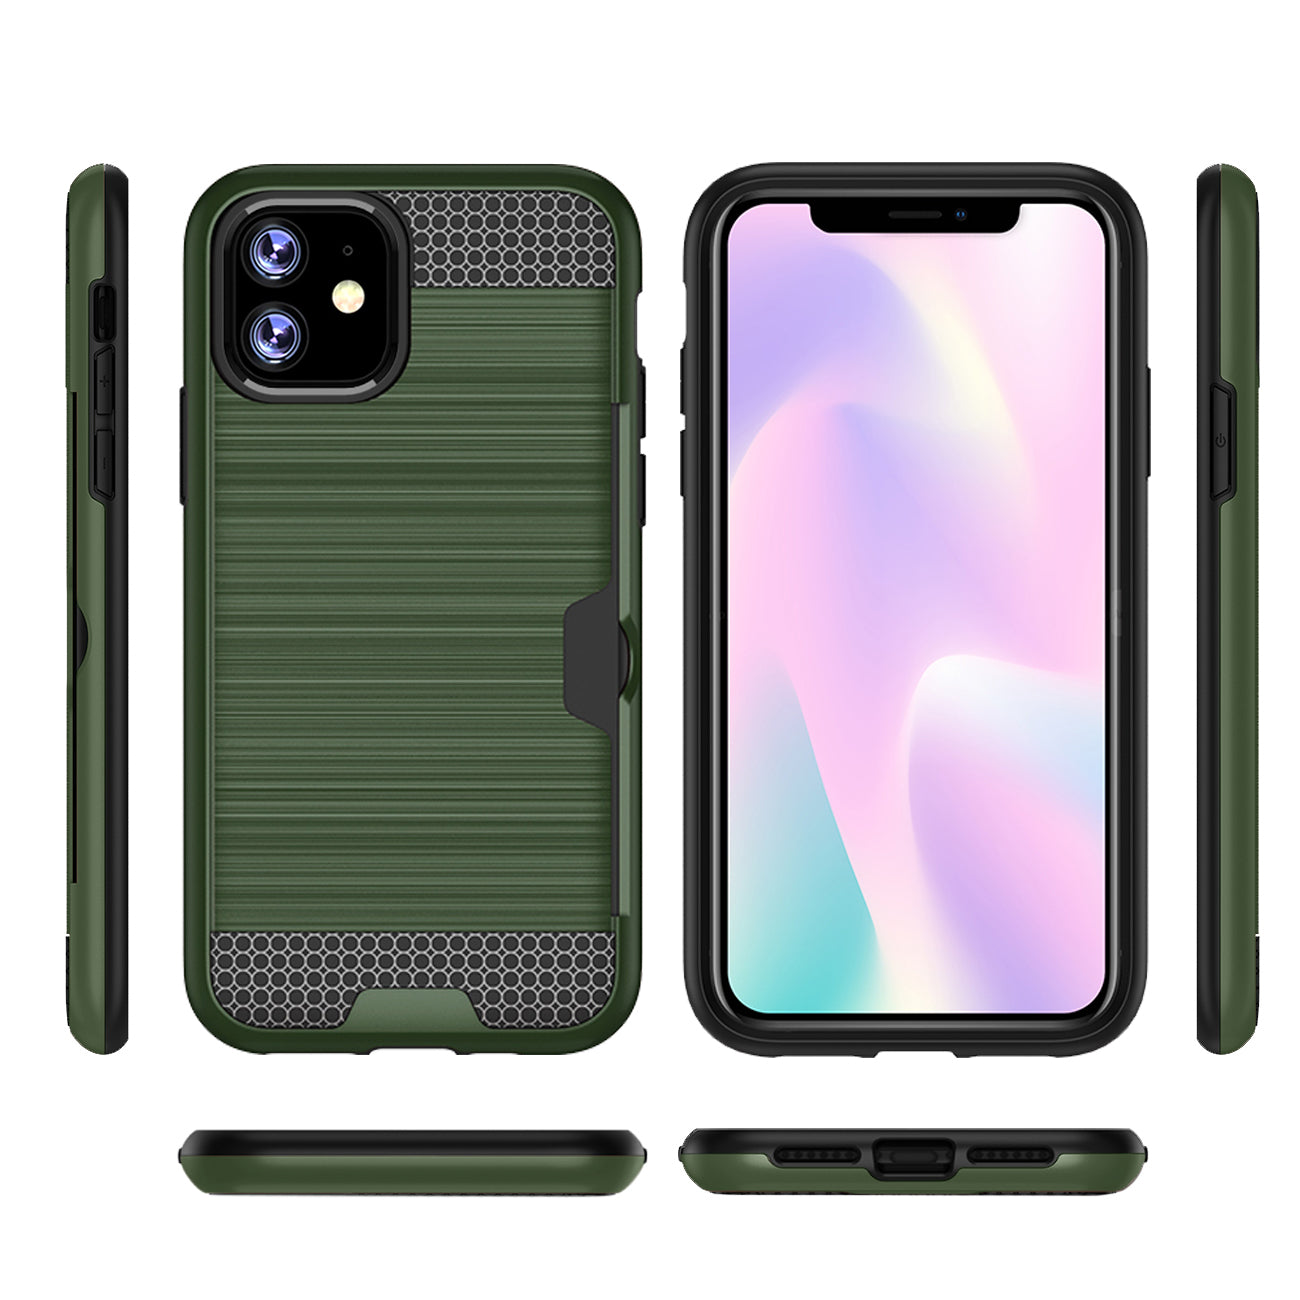 iPhone 11 SLIM ARMOR HYBRID CASE WITH CARD HOLDER IN GREEN